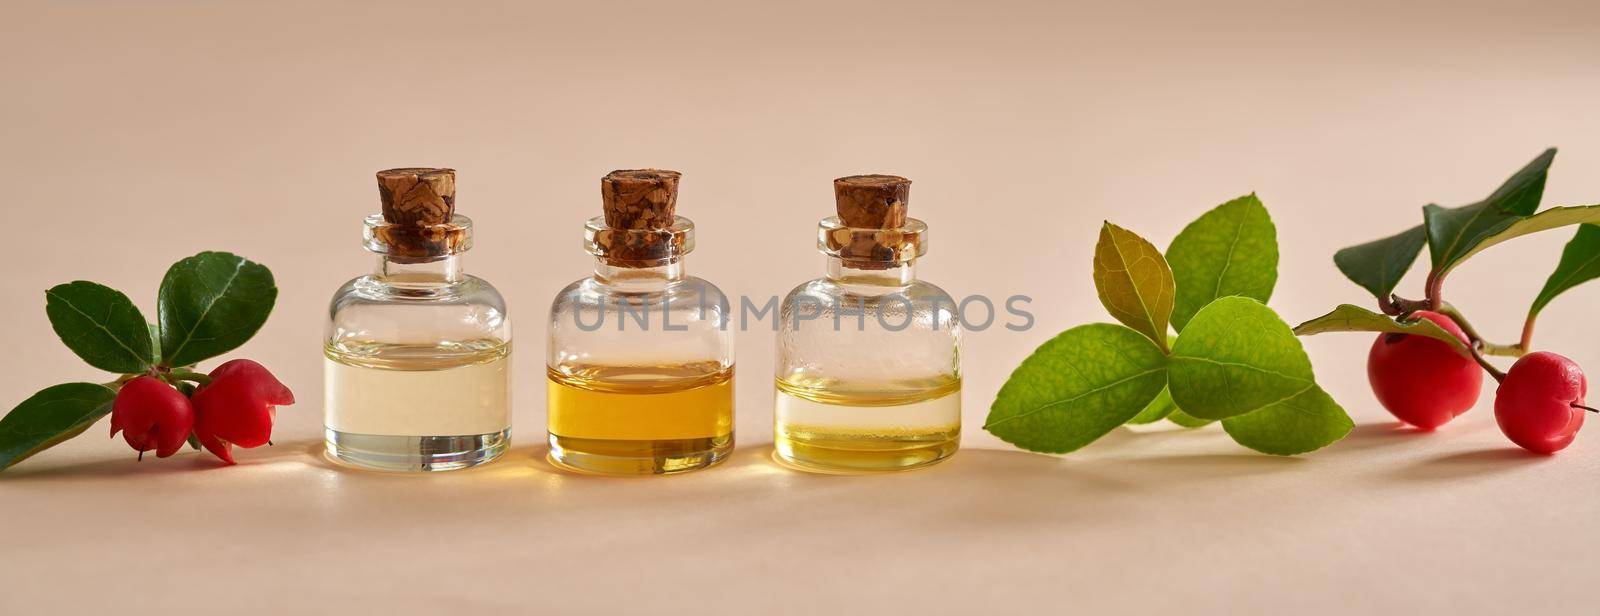 Panoramic banner of essential oil bottles with fresh wintergreen or Gaultheria procumbens on pastel orange background by madeleine_steinbach